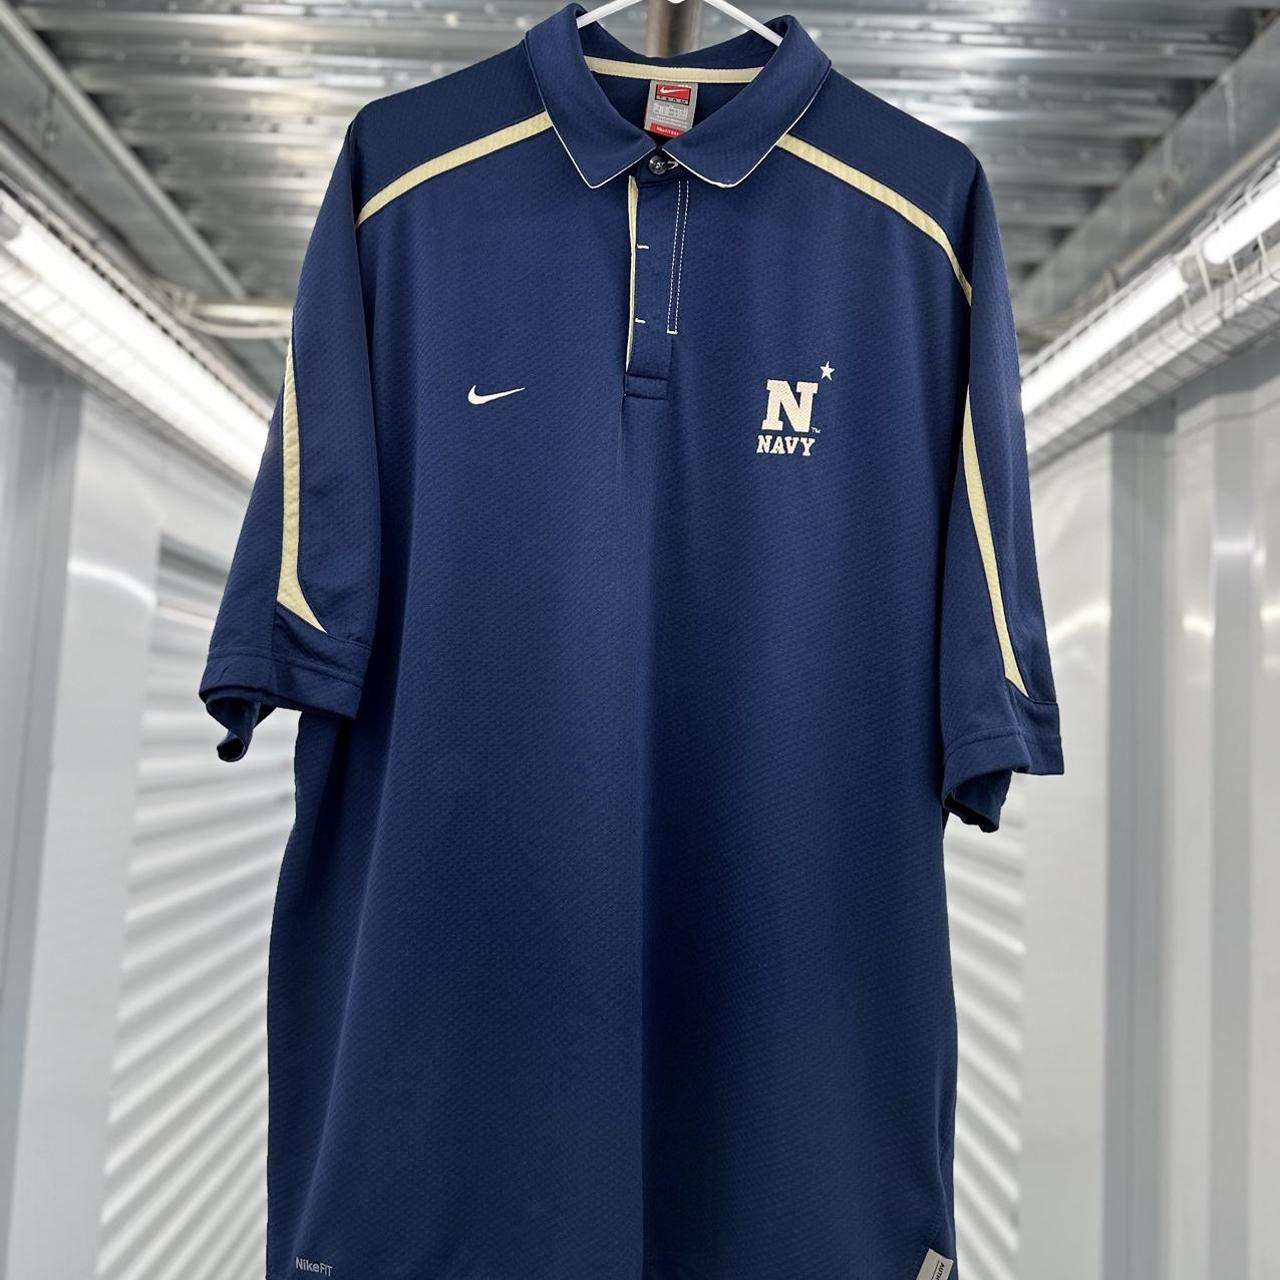 Nike Men's Navy and Gold Polo-shirts